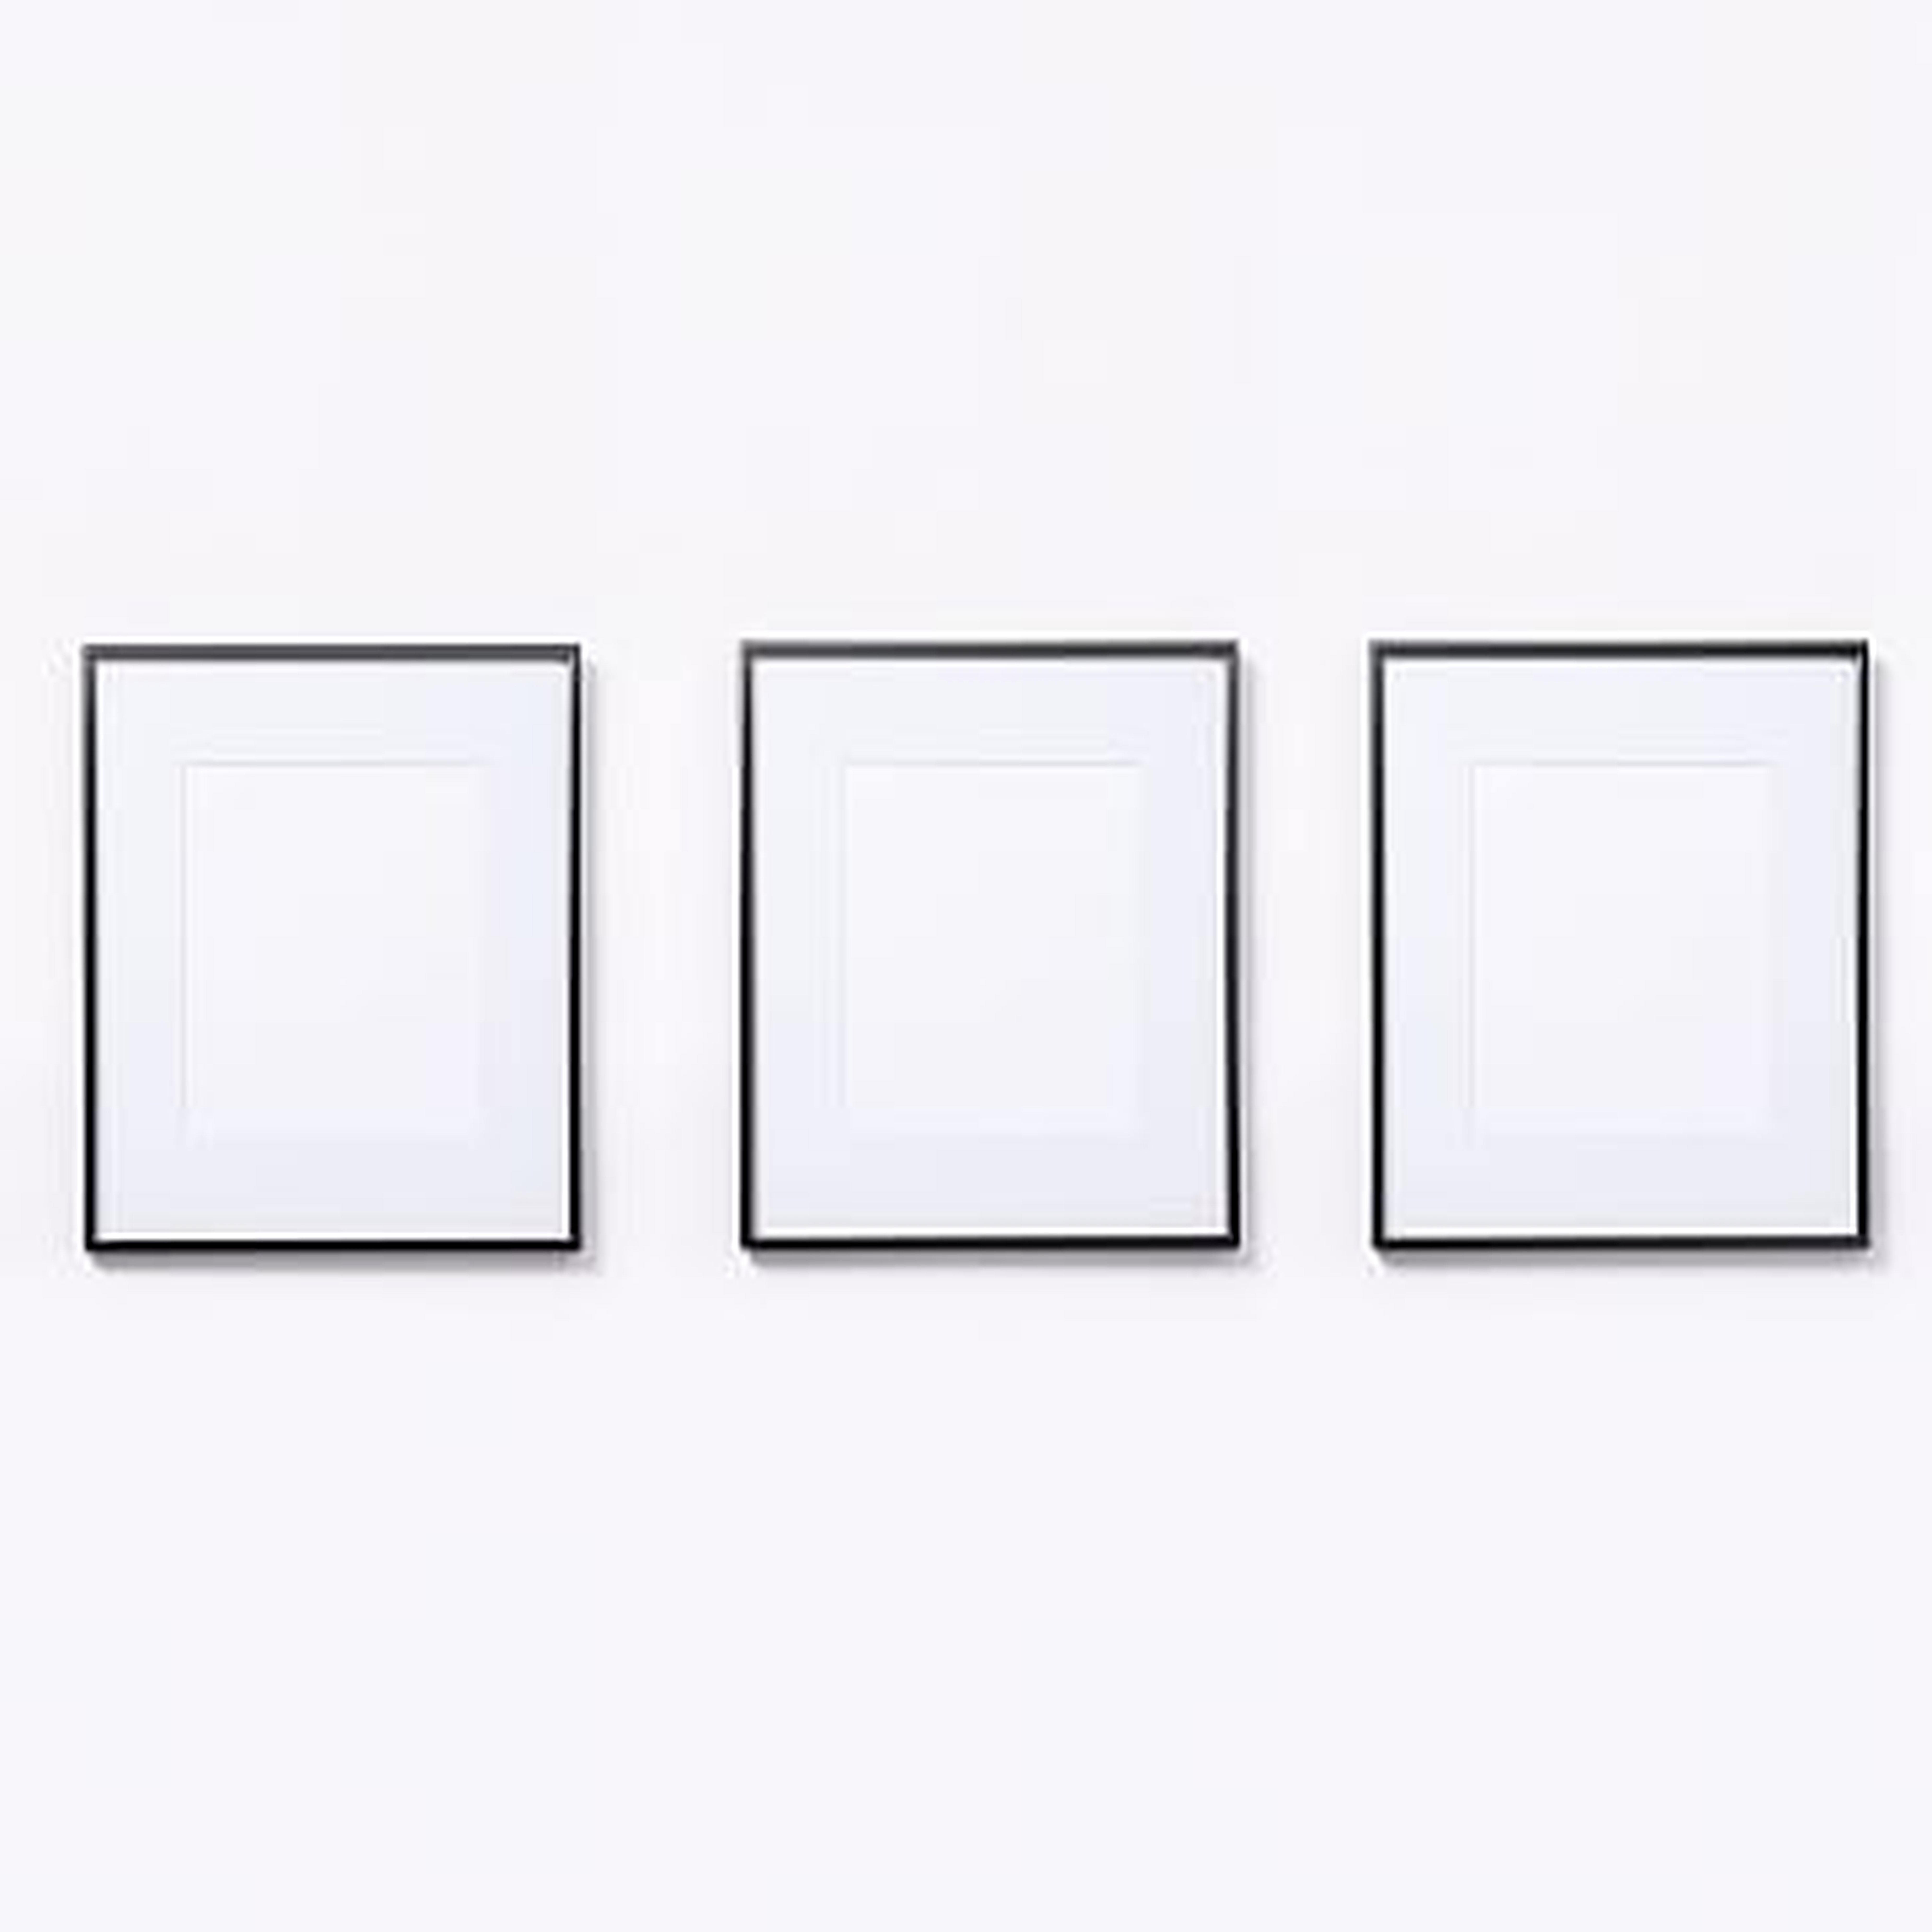 Gallery Frame, Antique Bronze, Set of 3, 8" x 10" (13" x 16" without mat) - West Elm